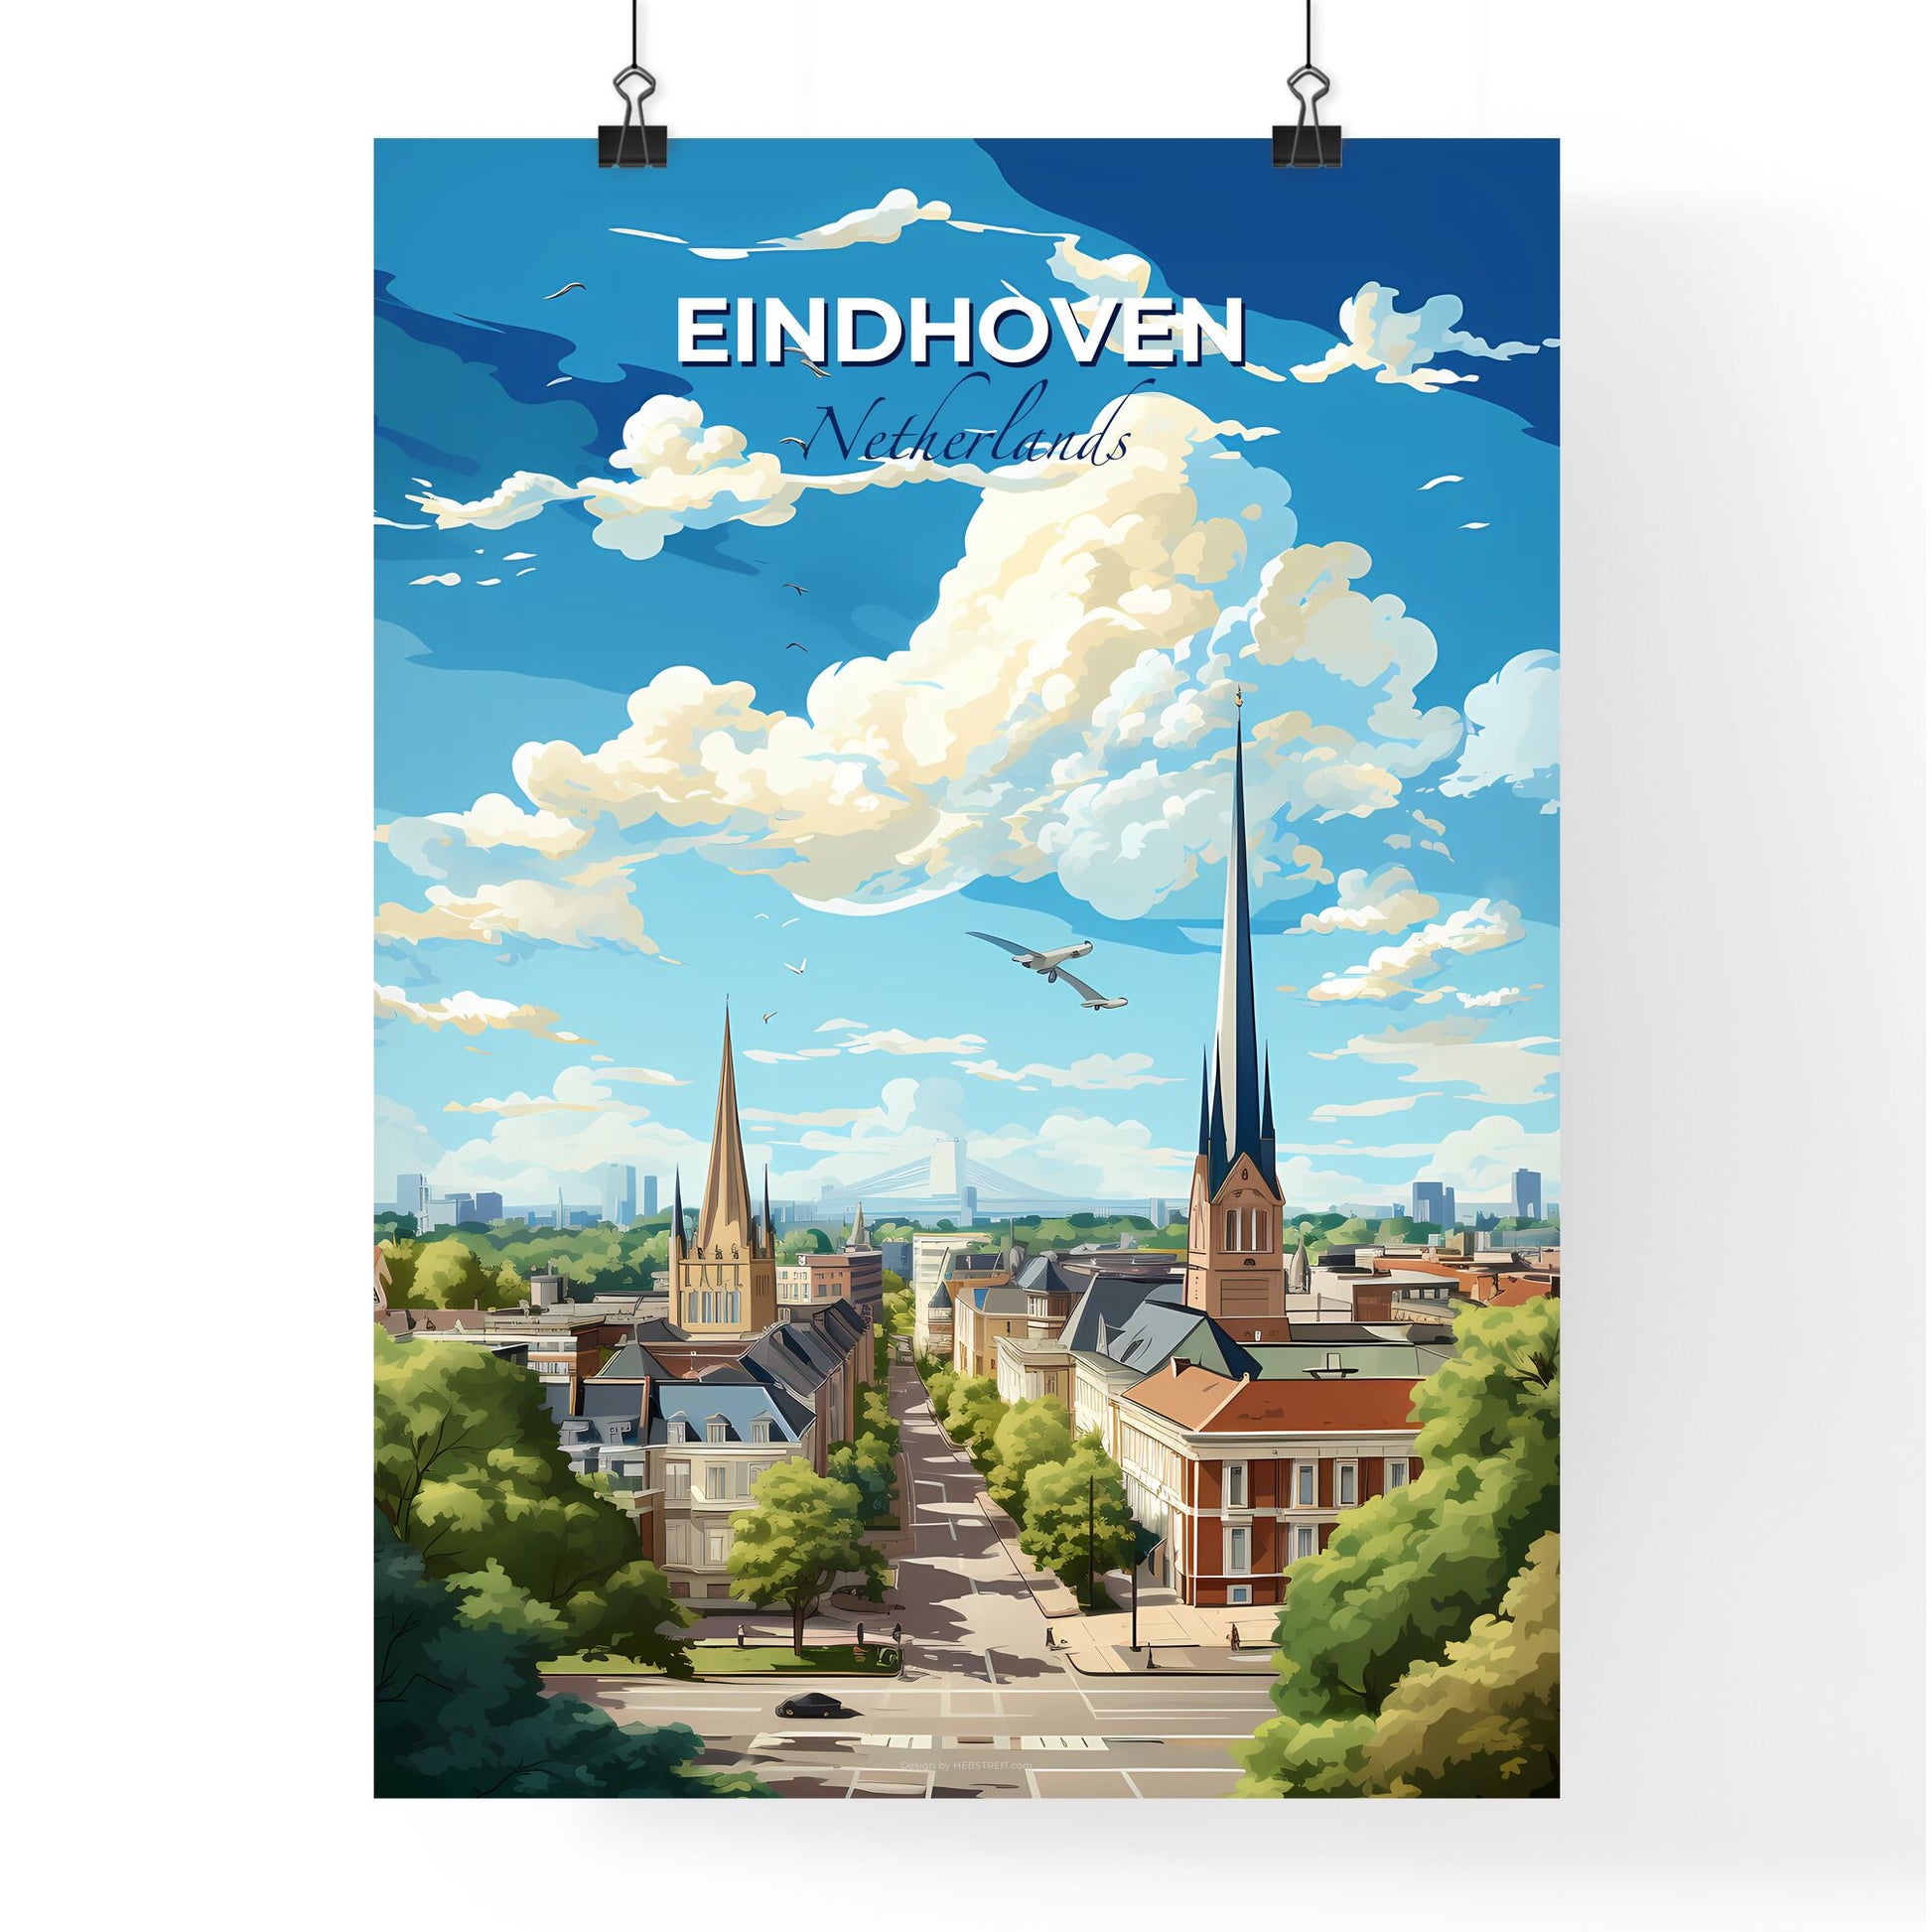 Eindhoven Netherlands Skyline - A City With Trees And Buildings - Customizable Travel Gift Default Title